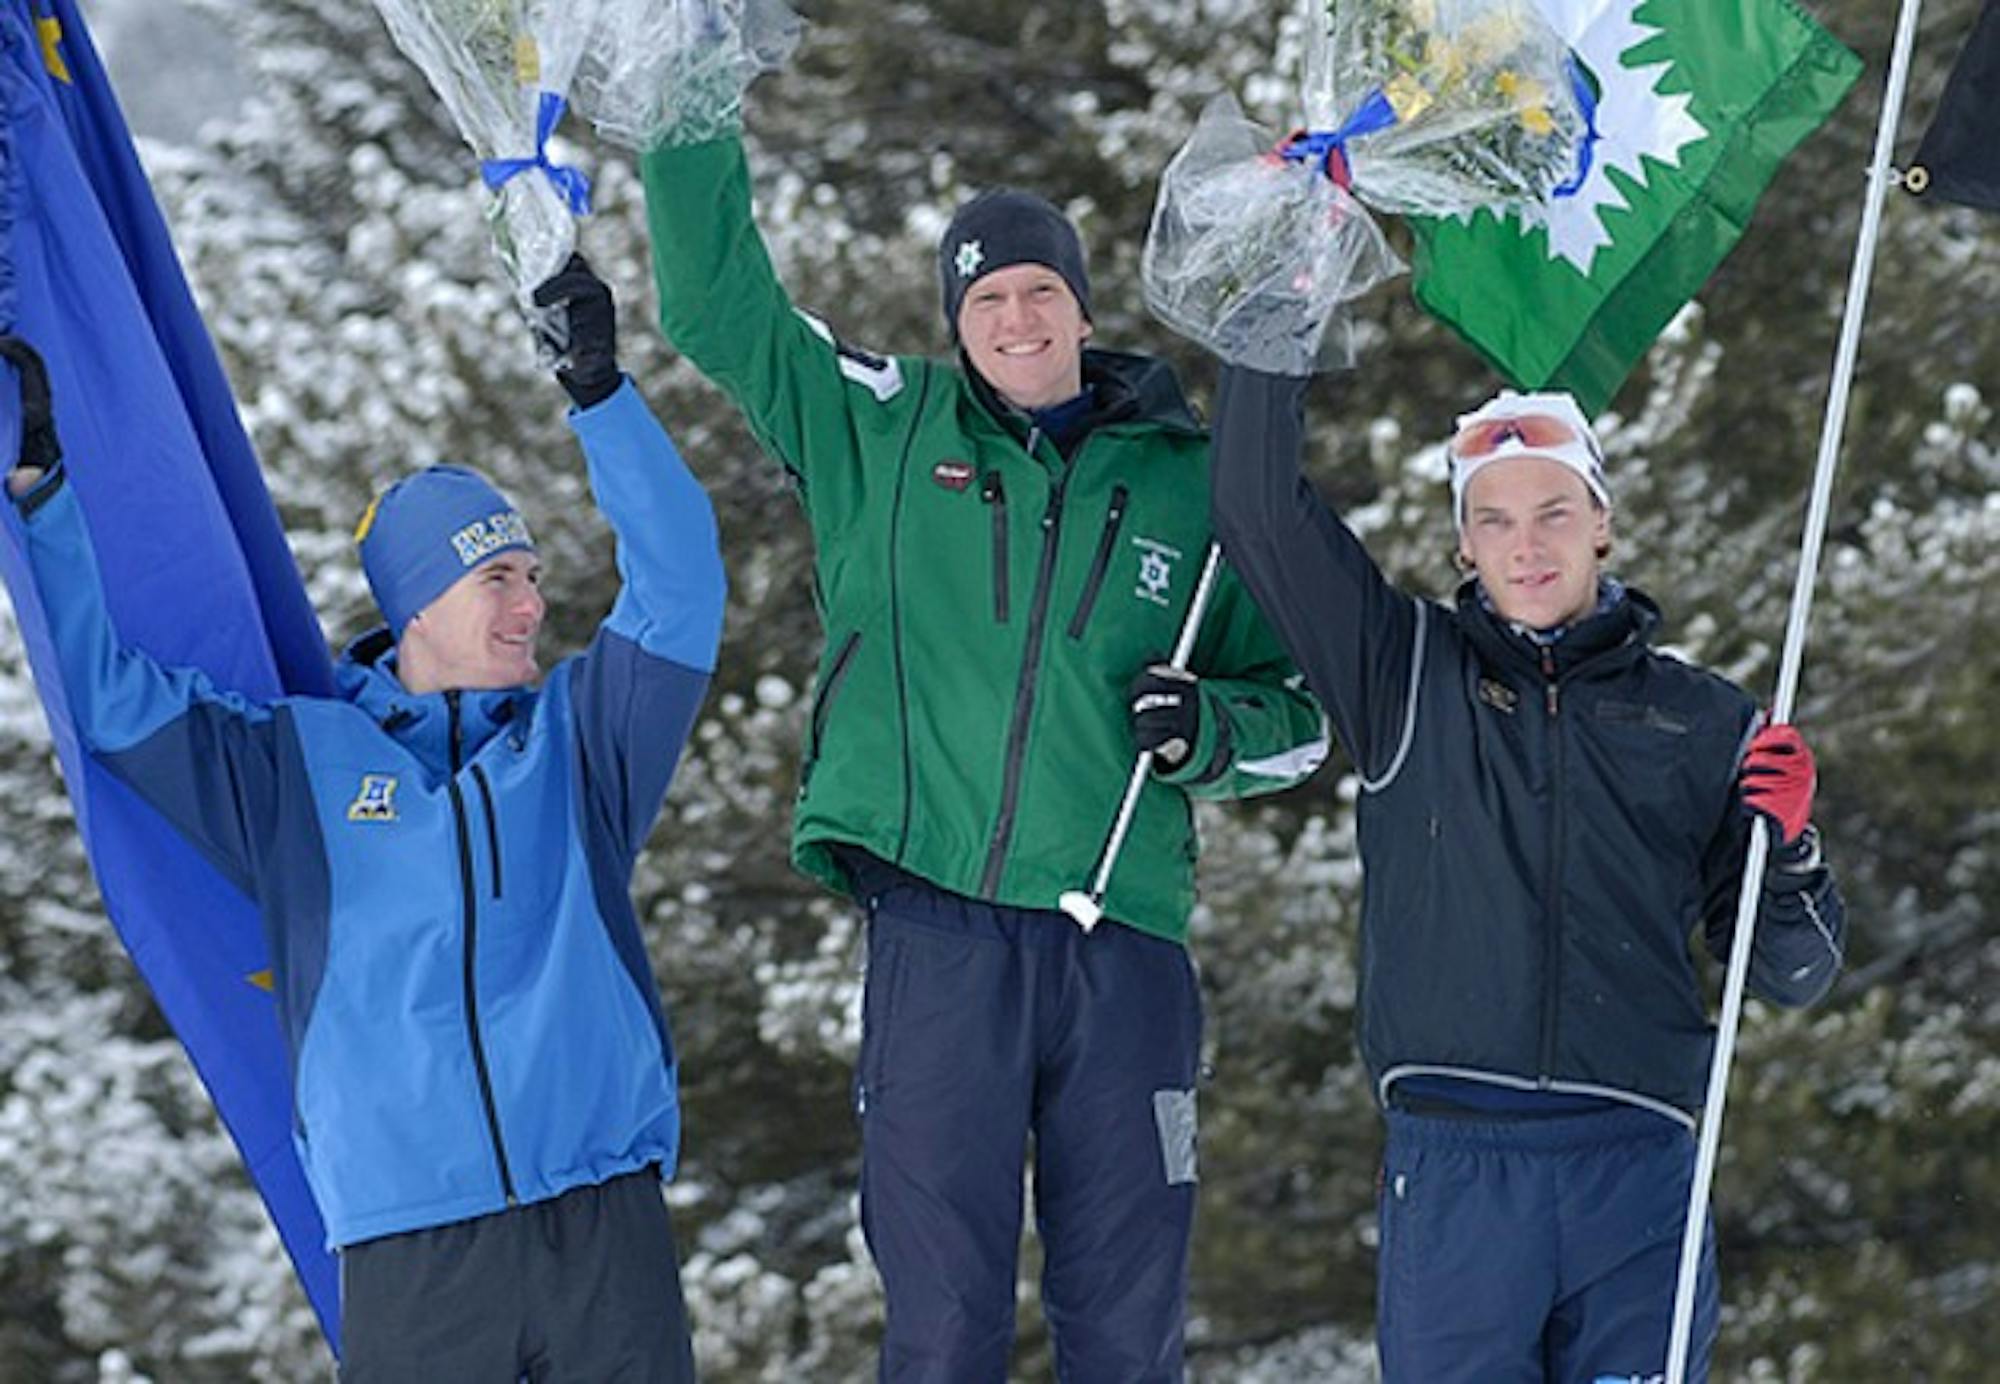 Glenn Randall '09 stands atop the podium after winning the NCAA 10k freestyle cross country title on Wednesday.